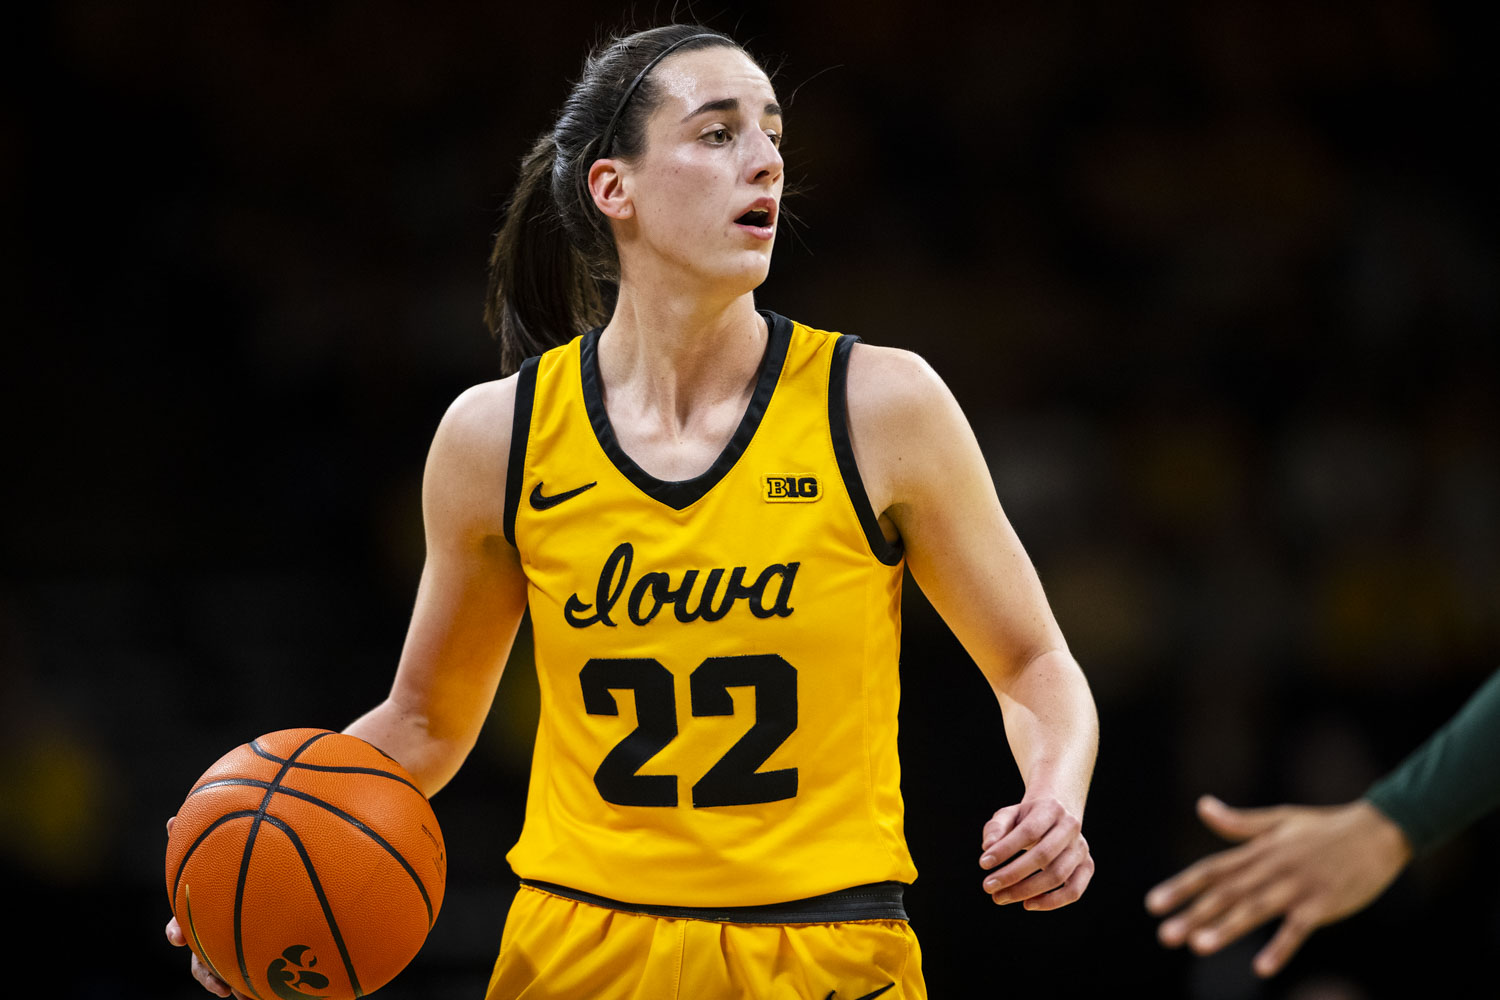 Iowa women's basketball star Caitlin Clark to launch cereal at Hy-Vee ...